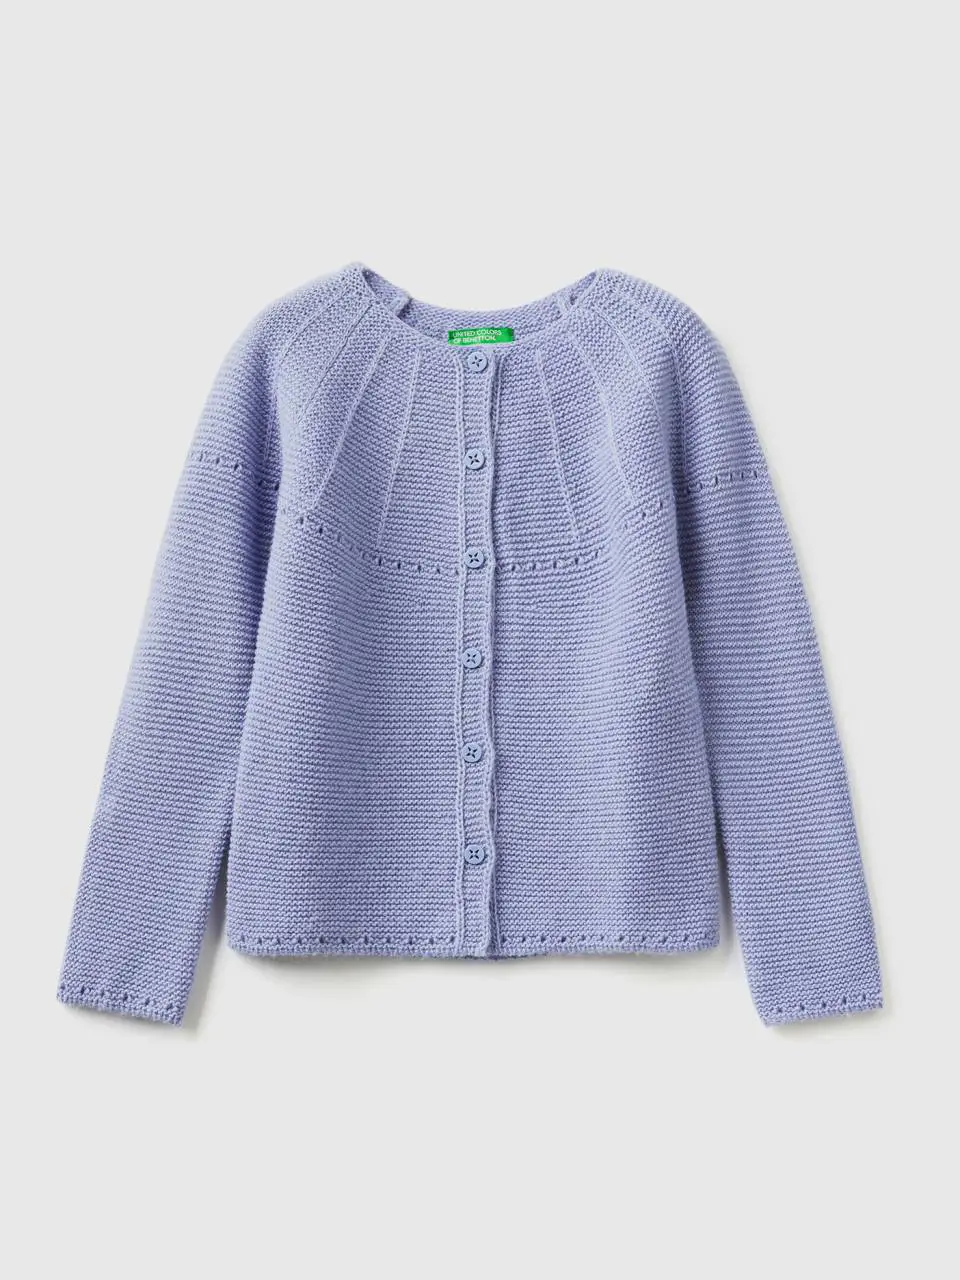 Benetton cardigan with perforated details. 1